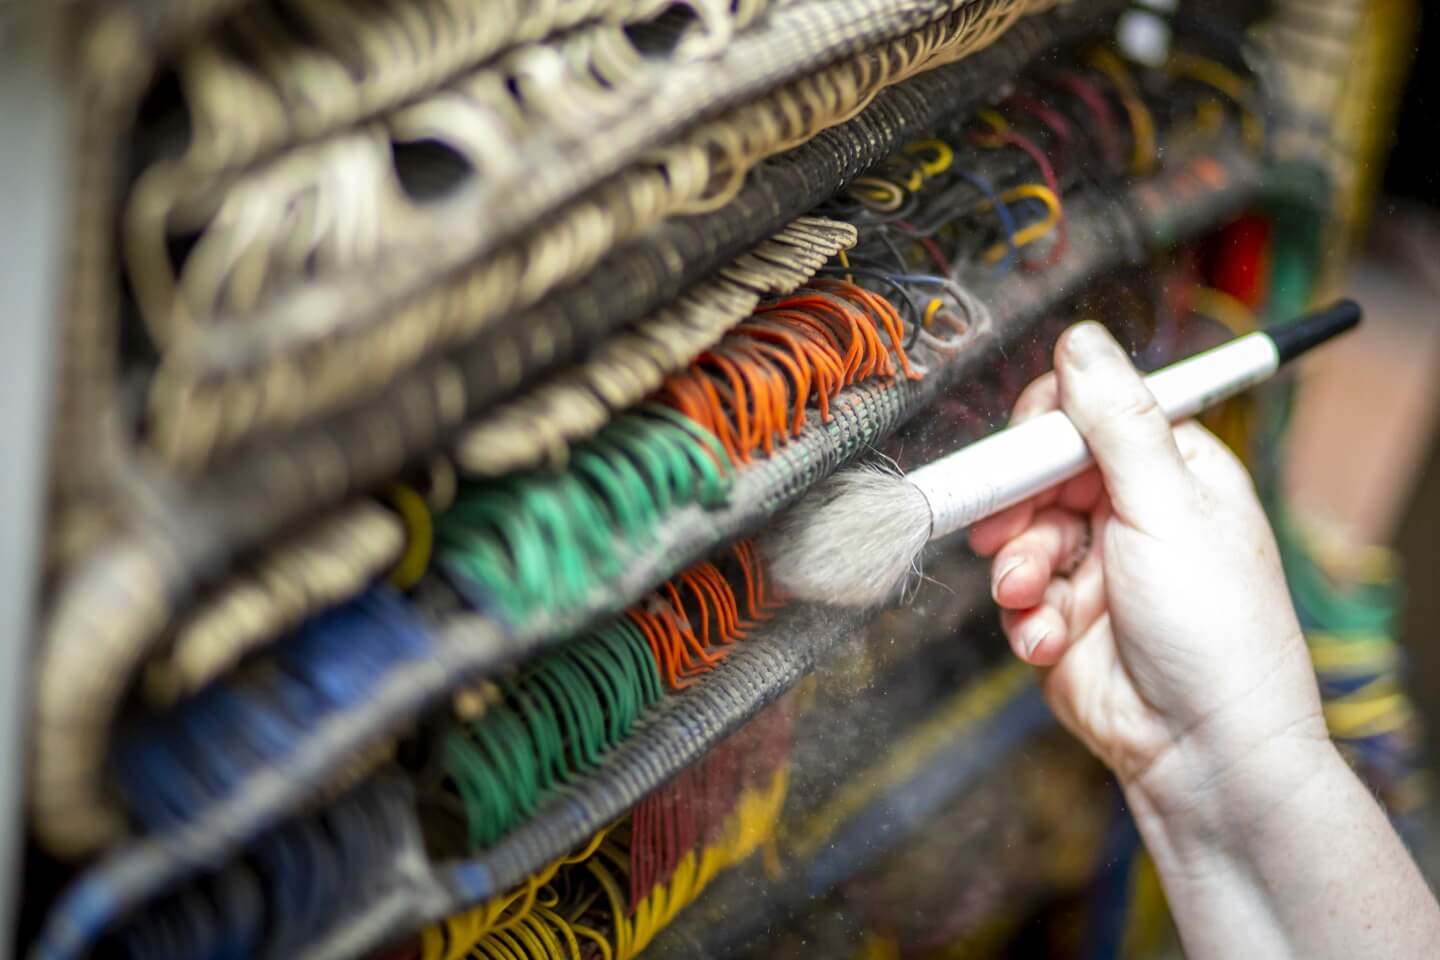 A brush runs along hundreds of wires in blue, orange, green, and beige varieties.